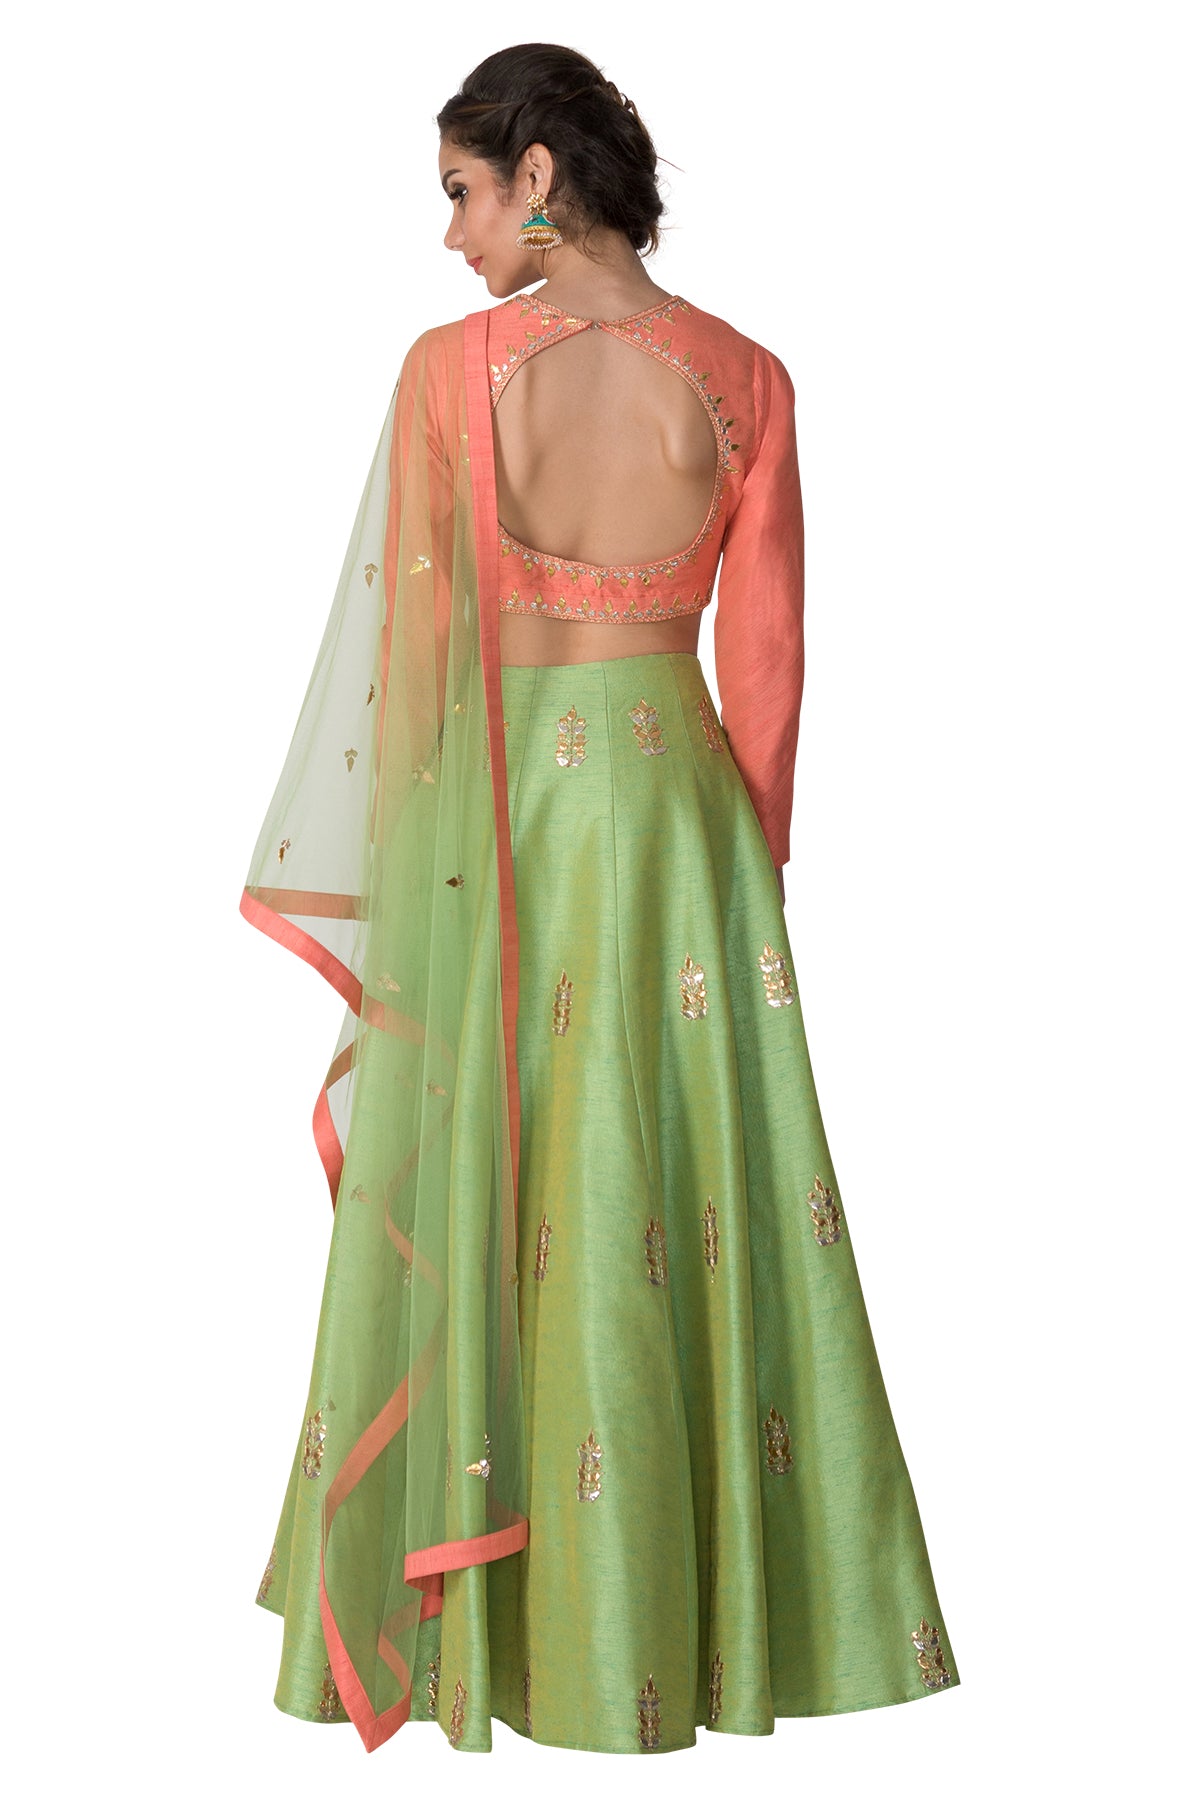 Peach blouse with green skirt and Dupatta